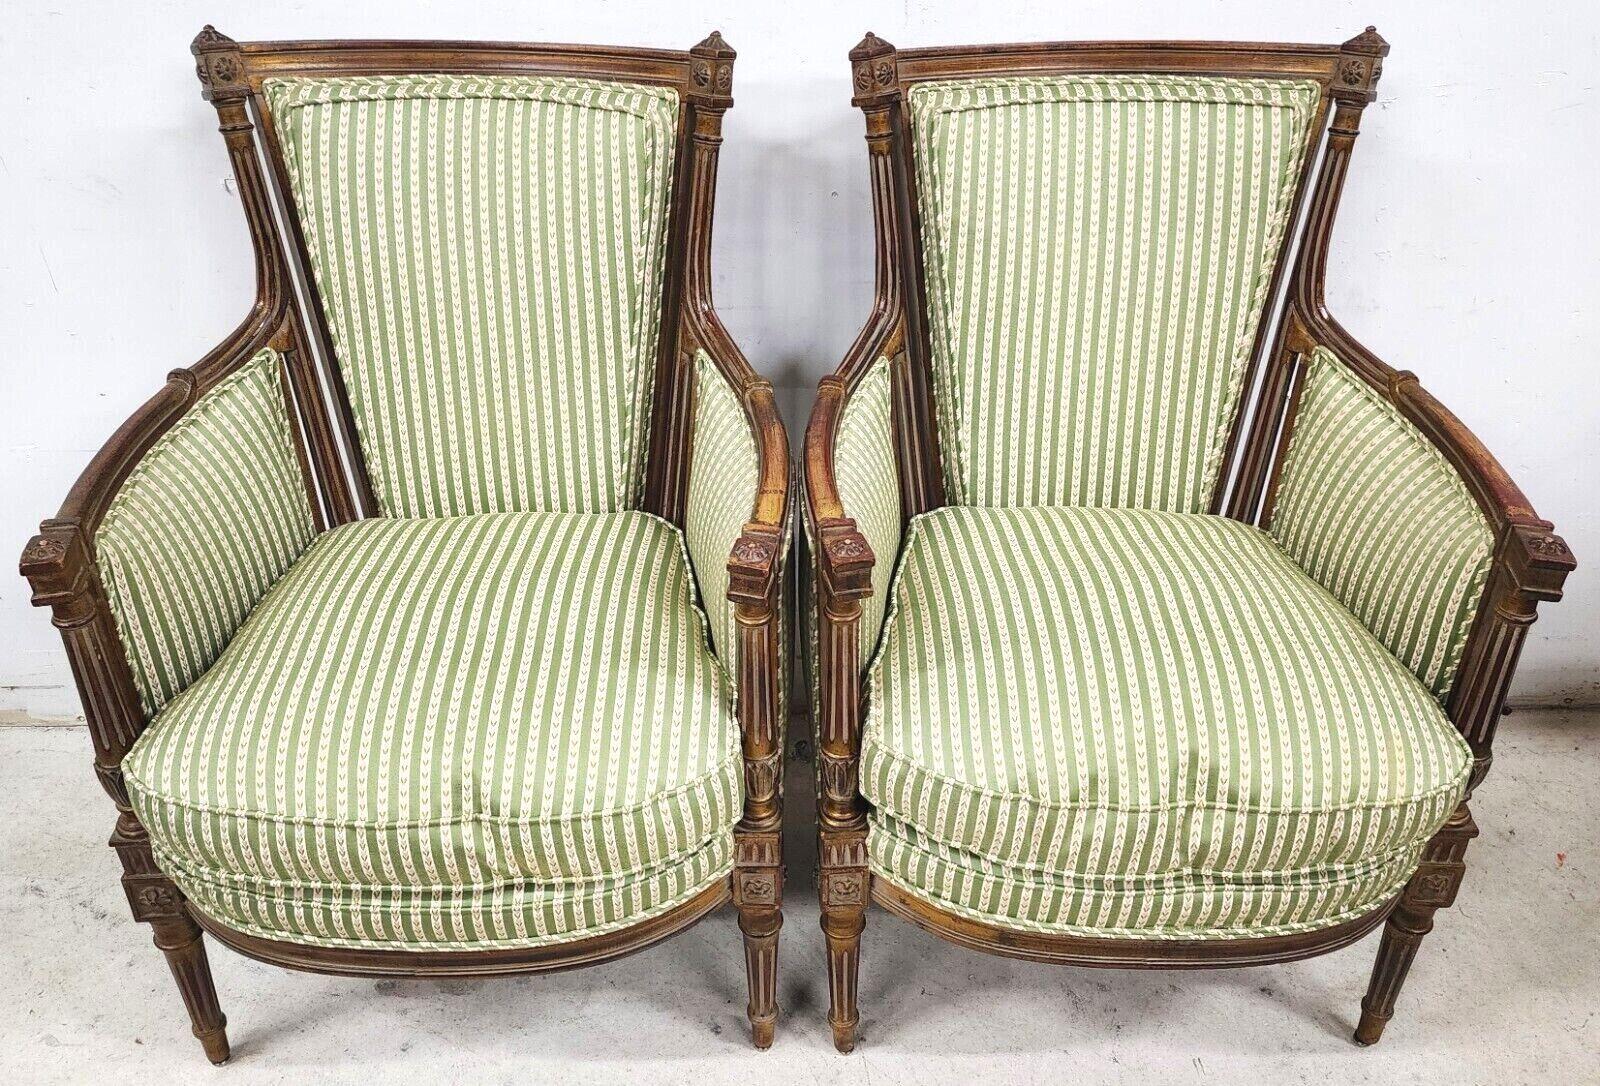 Offering one of our recent palm beach estate fine furniture acquisitions of A 
Set of 2 French Louis XVI Style Giltwood Bergère Chairs.
Seats are filled with down and foam so they are very comfortable without sagging.

Approximate Measurements